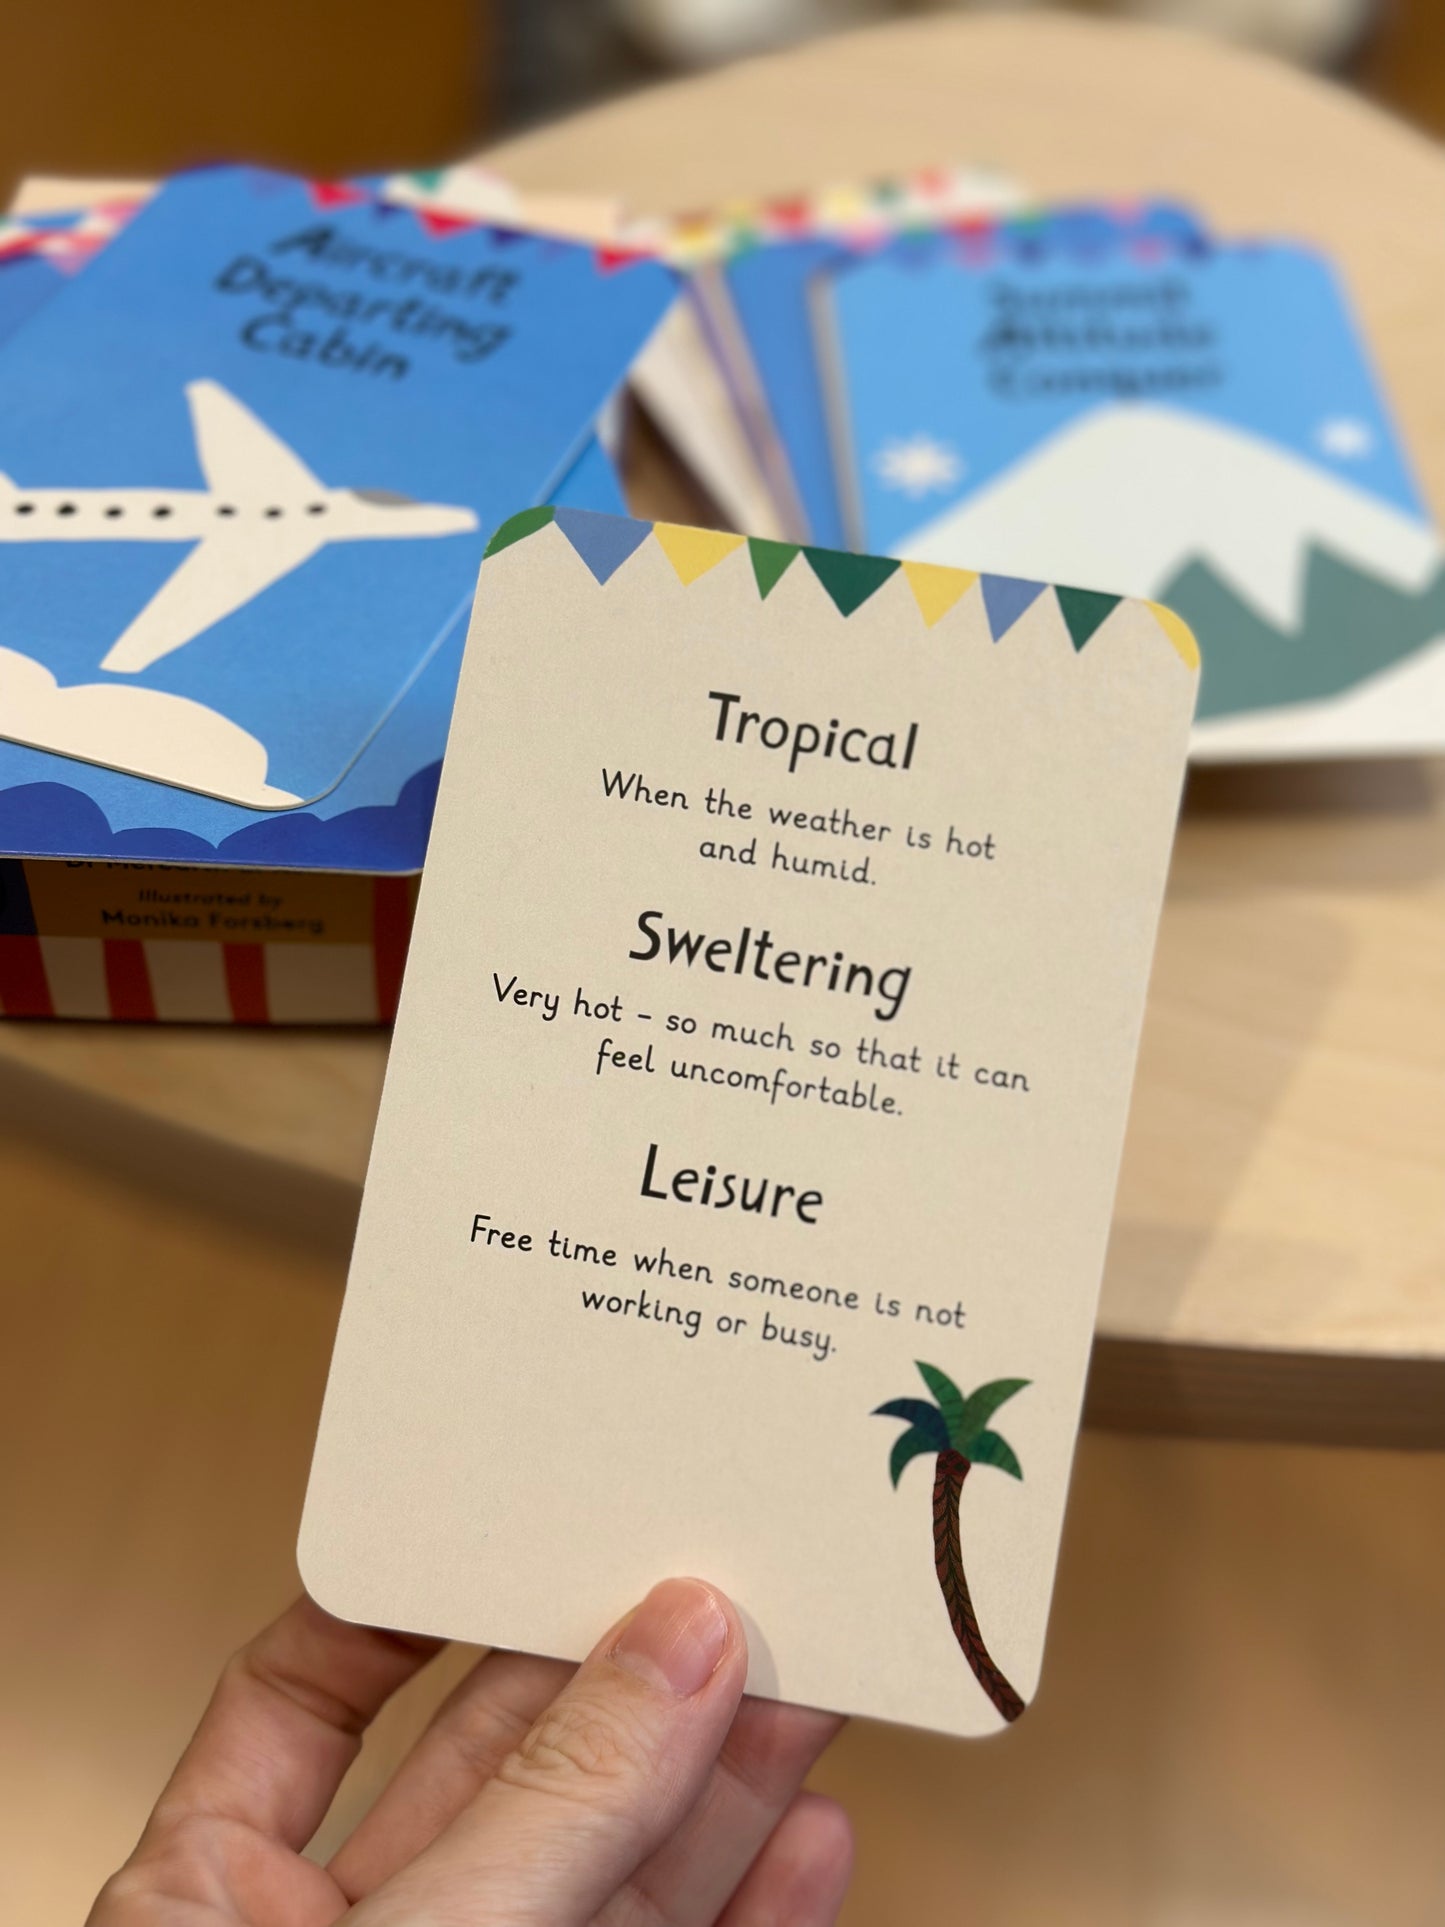 Little Word Whizz: An Interesting Story Box